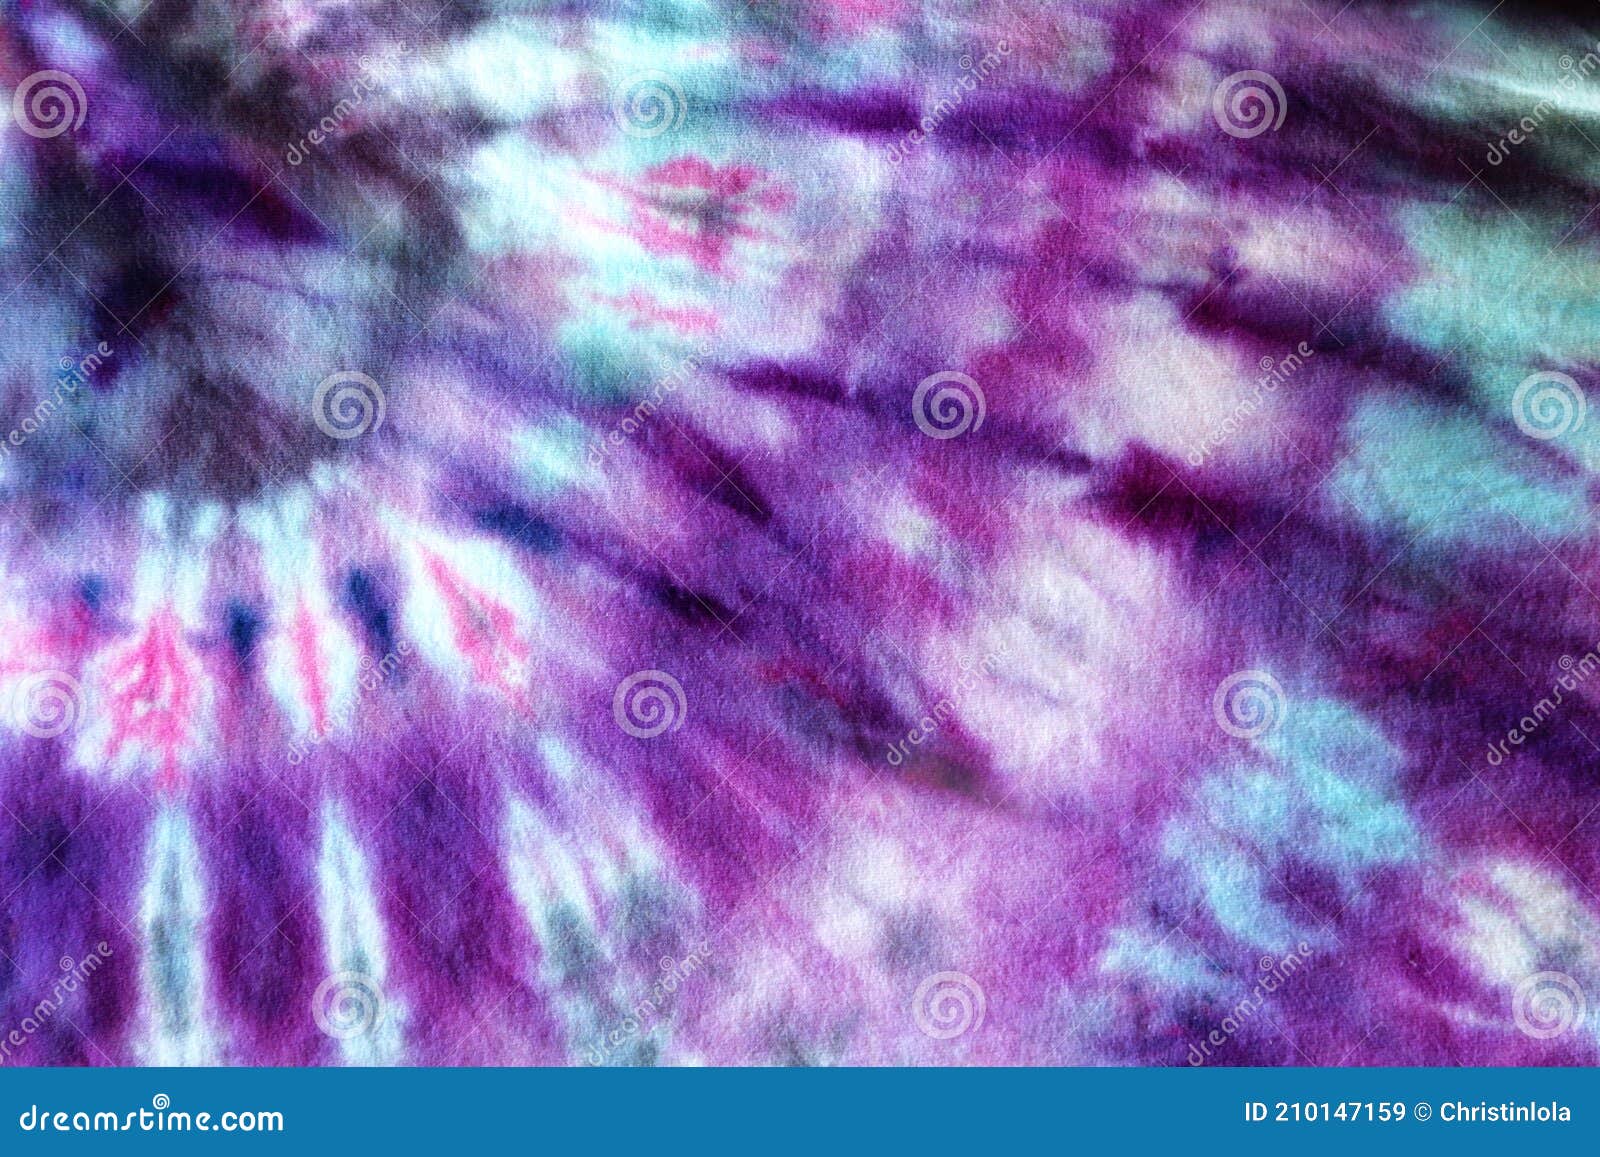 Classic Spiral Of Pink, Purple, Blue, And Black Tie Dye On Shirt ...